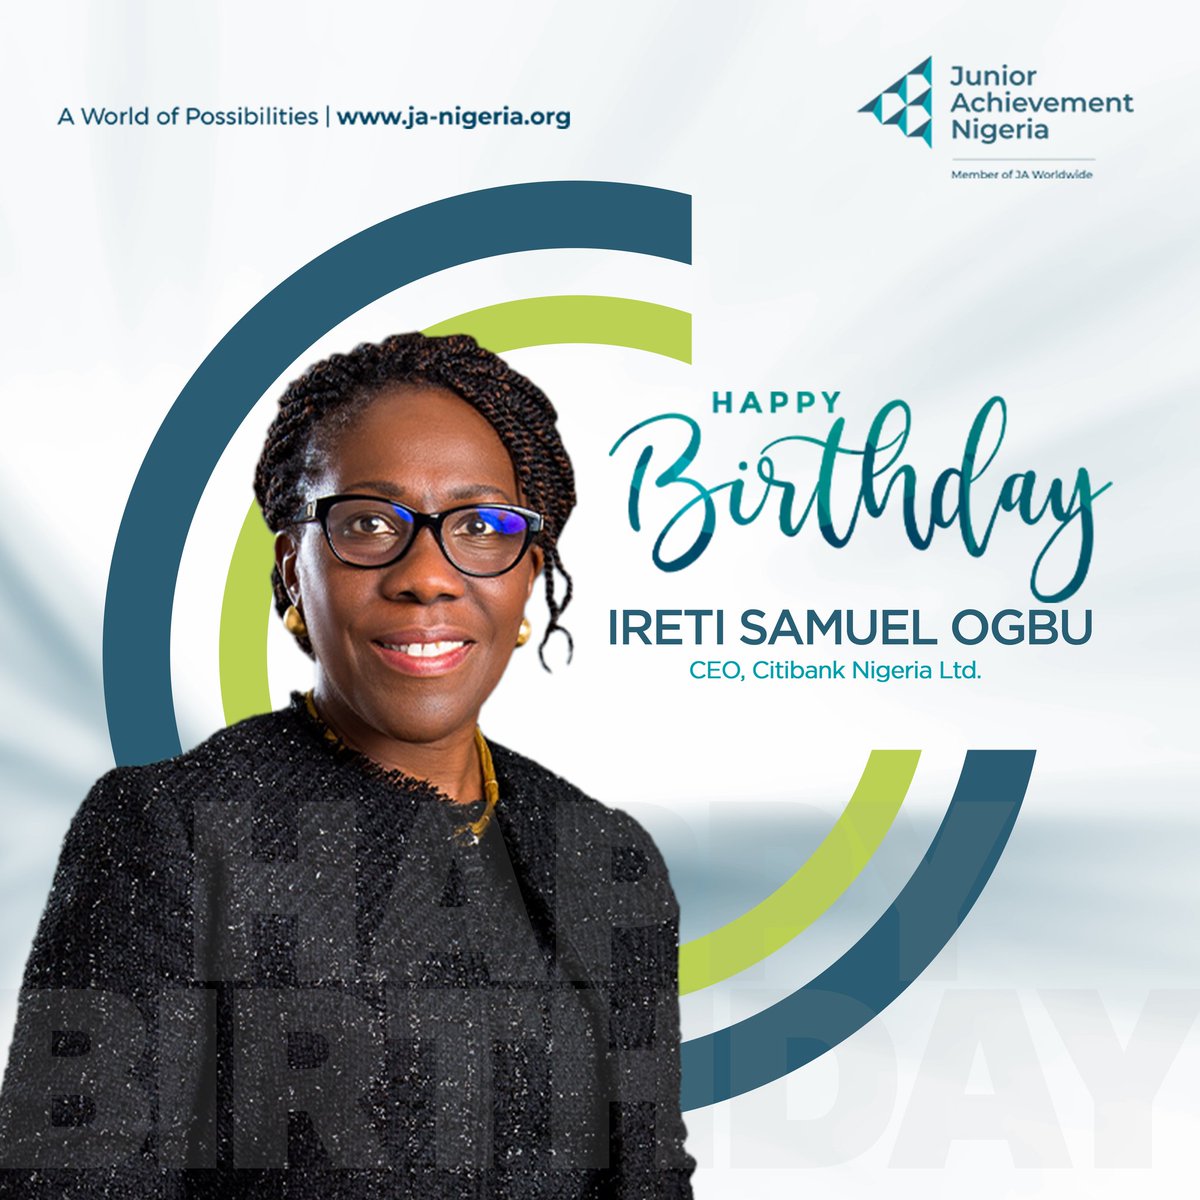 Happy birthday to our amiable Board Member and CEO, Citibank Nigeria Ltd, Ireti Samuel-Ogbu.

Your support has helped us reach and equip many young people with skills sets needed to thrive in a global economy.

#BirthdayCelebration #JANBoardMember #Impact #CitibankNG #JANigeria